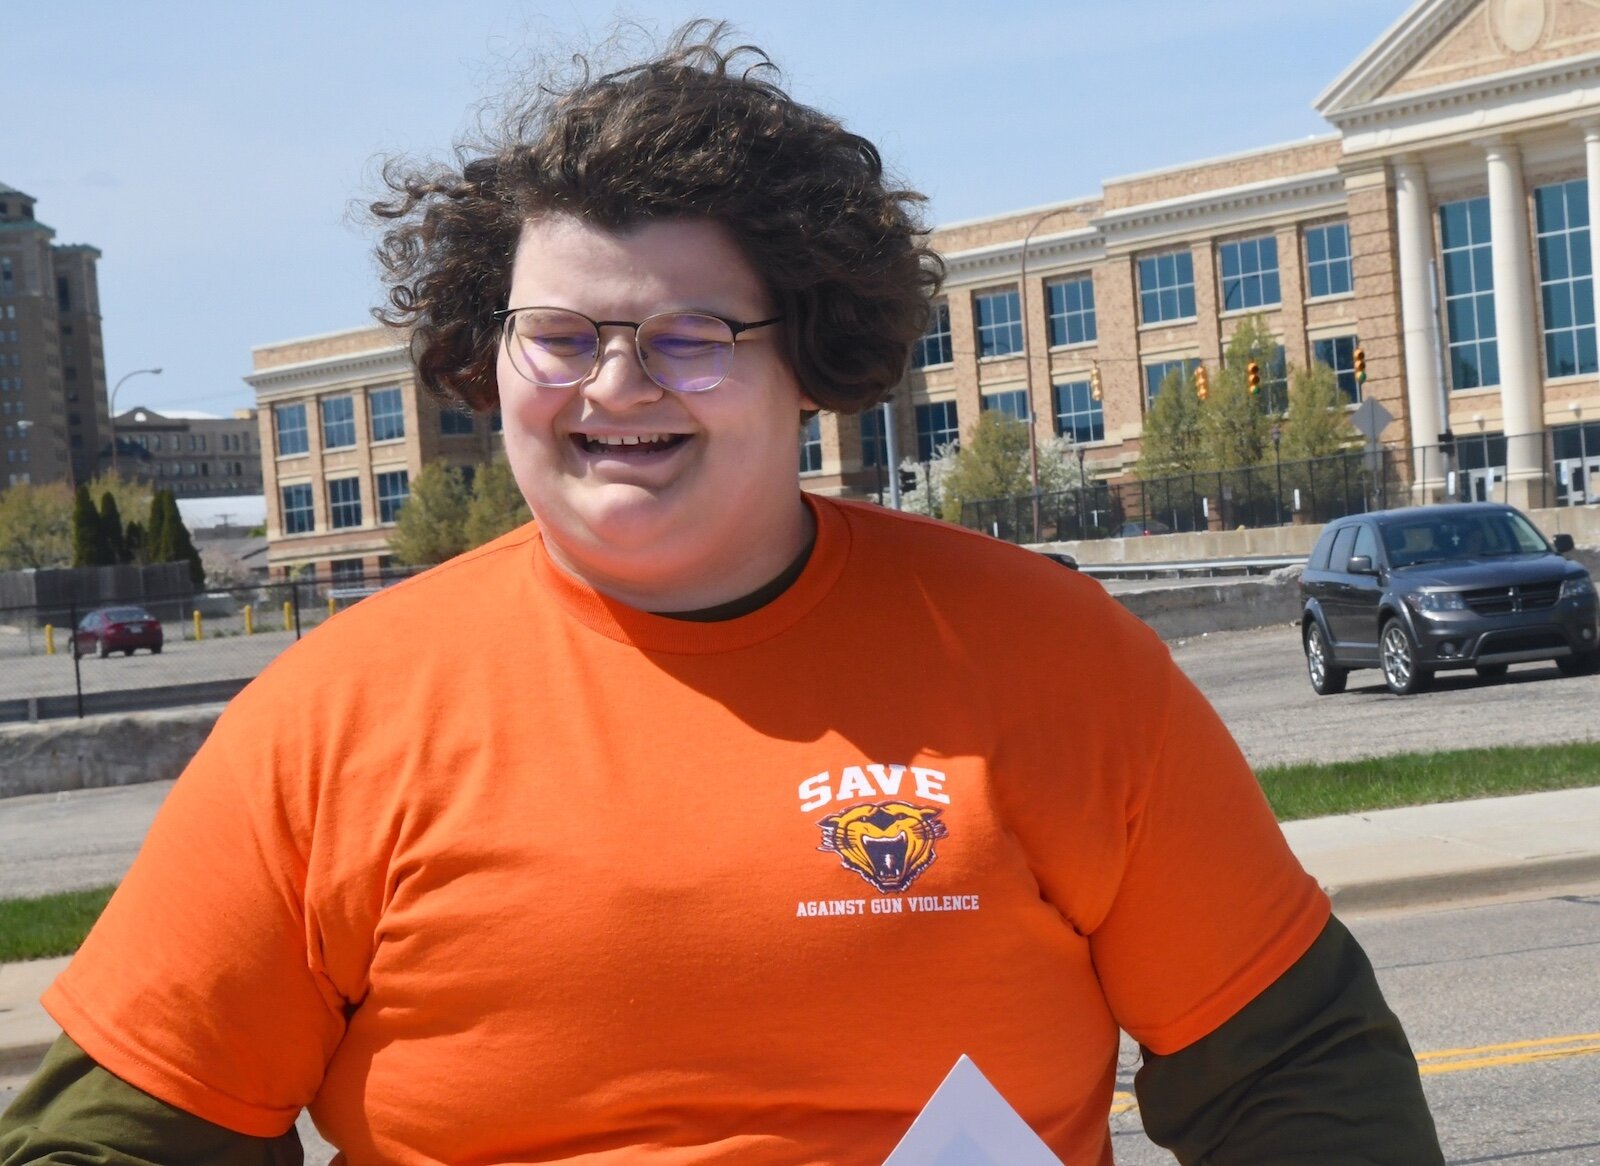 Marshall Murdick, a senior at Battle Creek Central High School, was an organizer of an anti-gun violence march and rally in downtown Battle Creek.